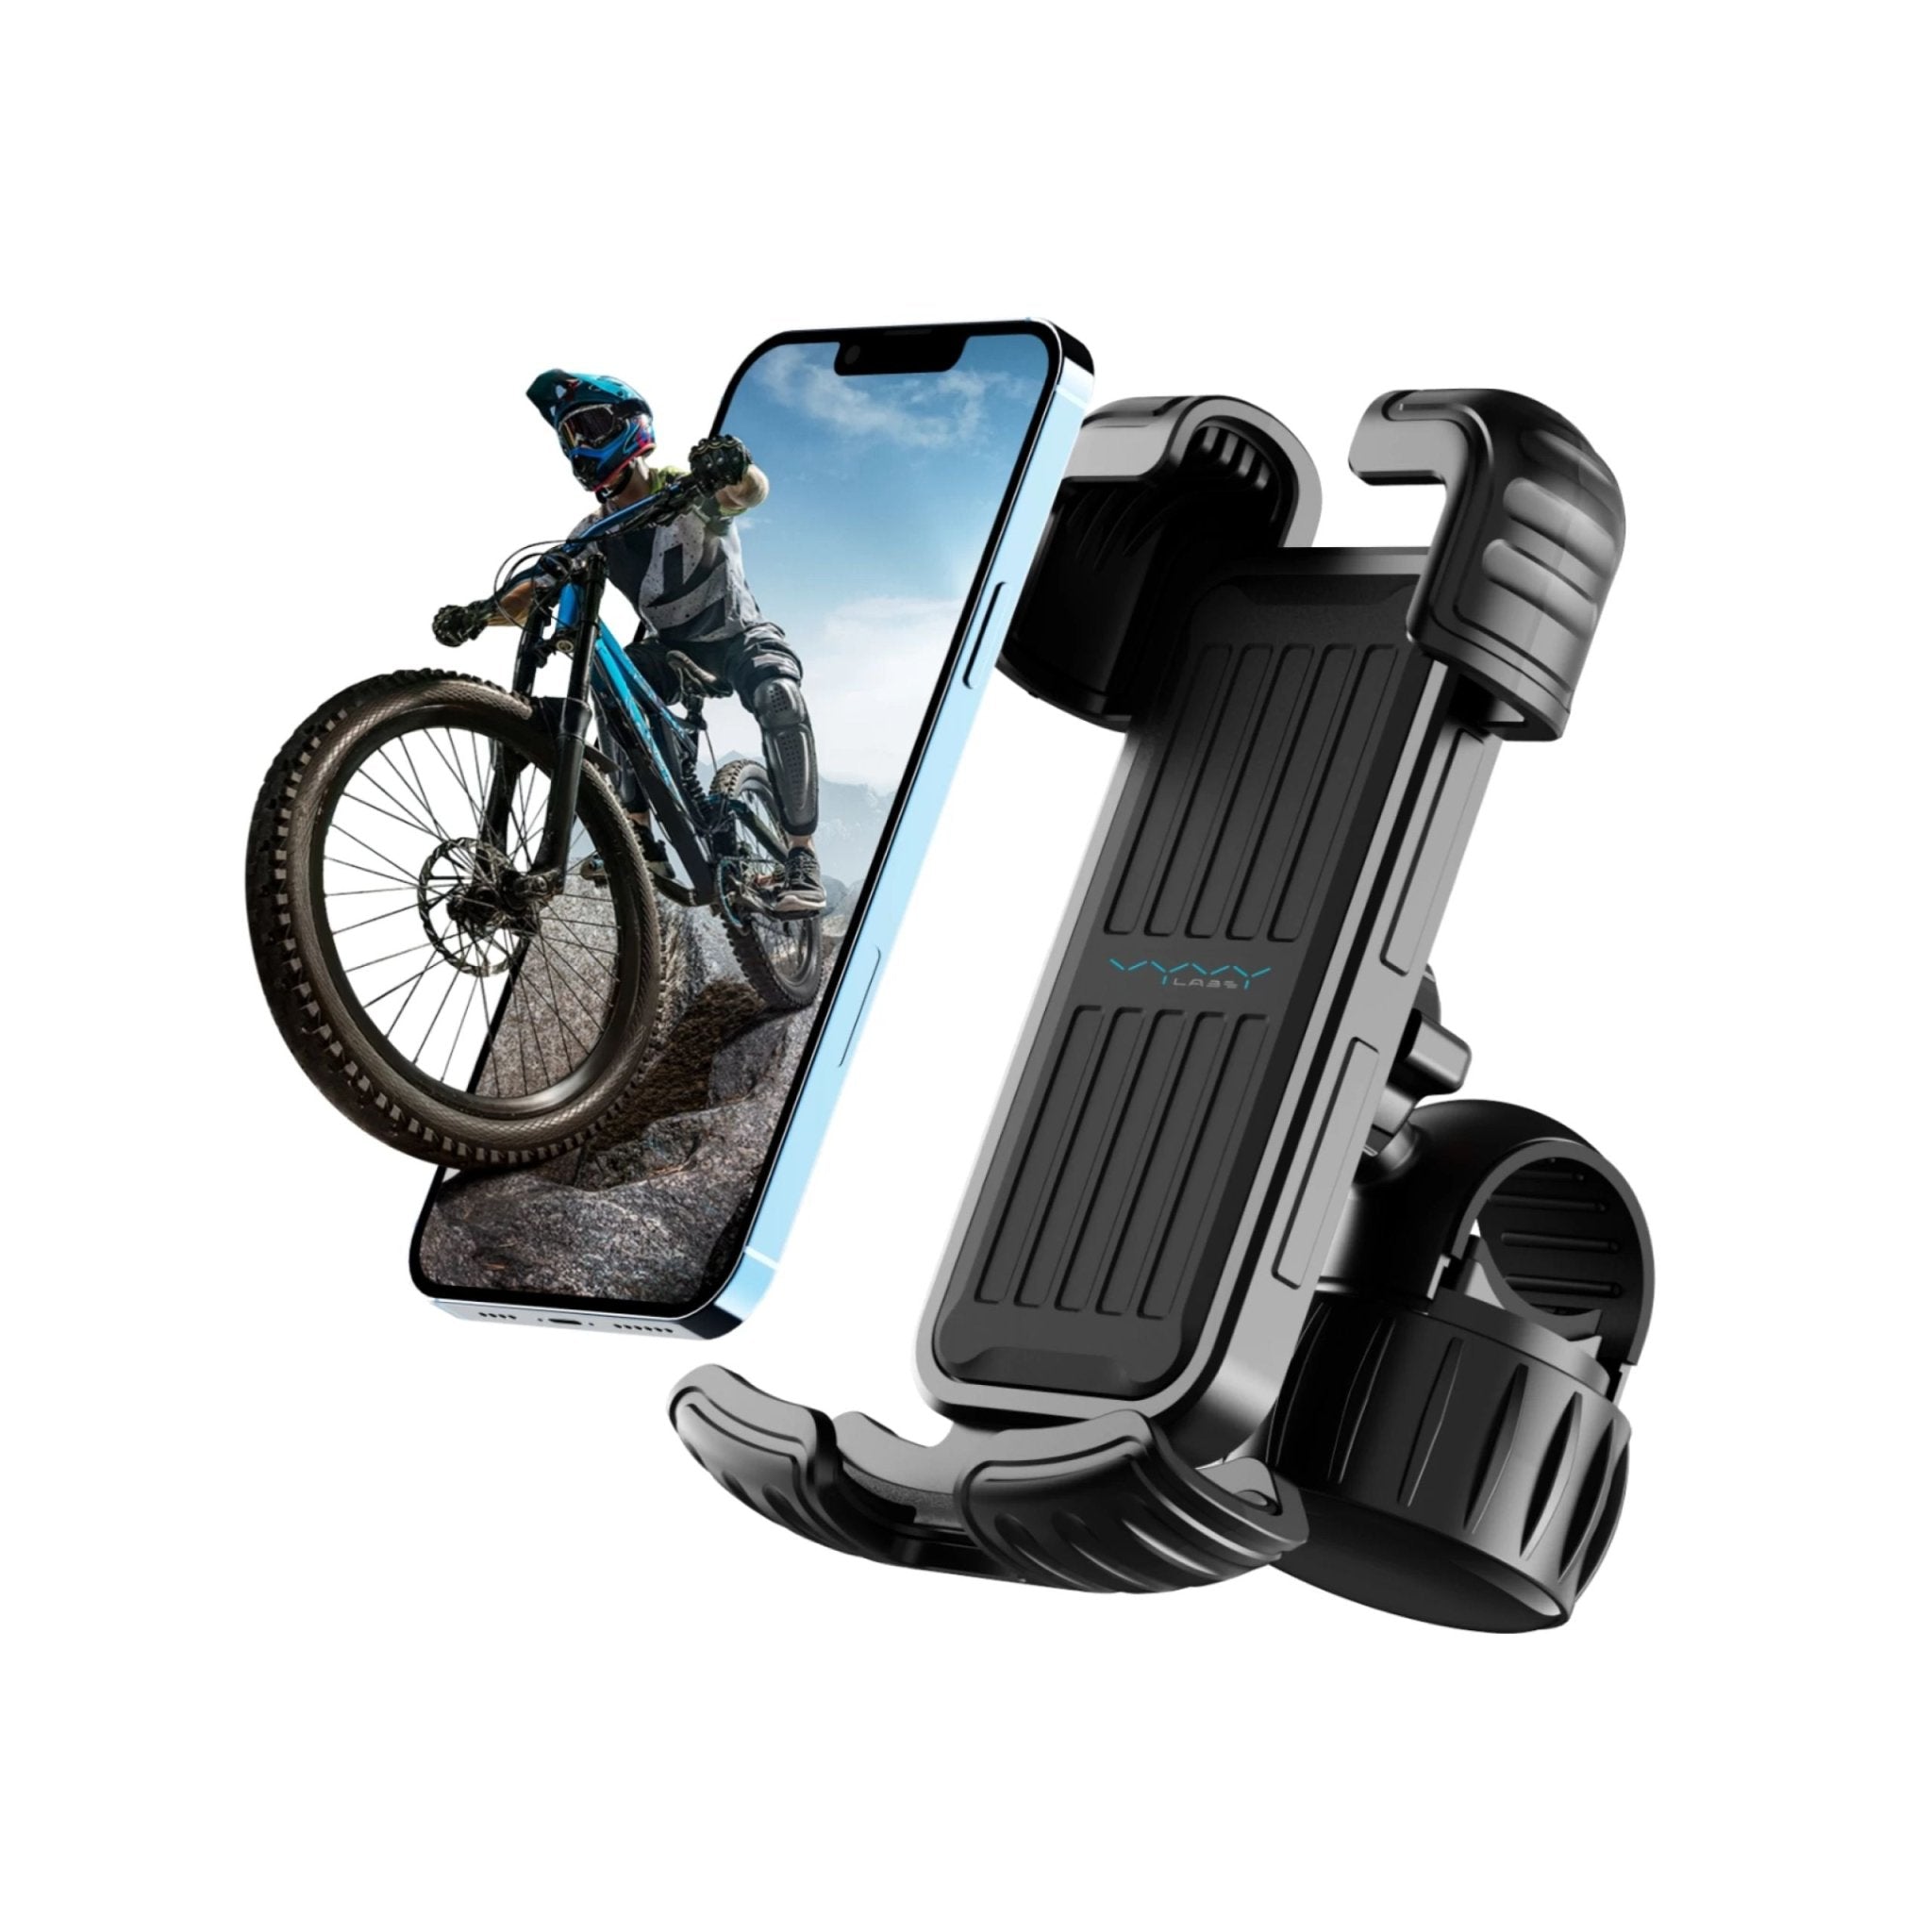 Vyvylabs Knight Cycling Holder (for Bicycle and Motorcycle) - Black